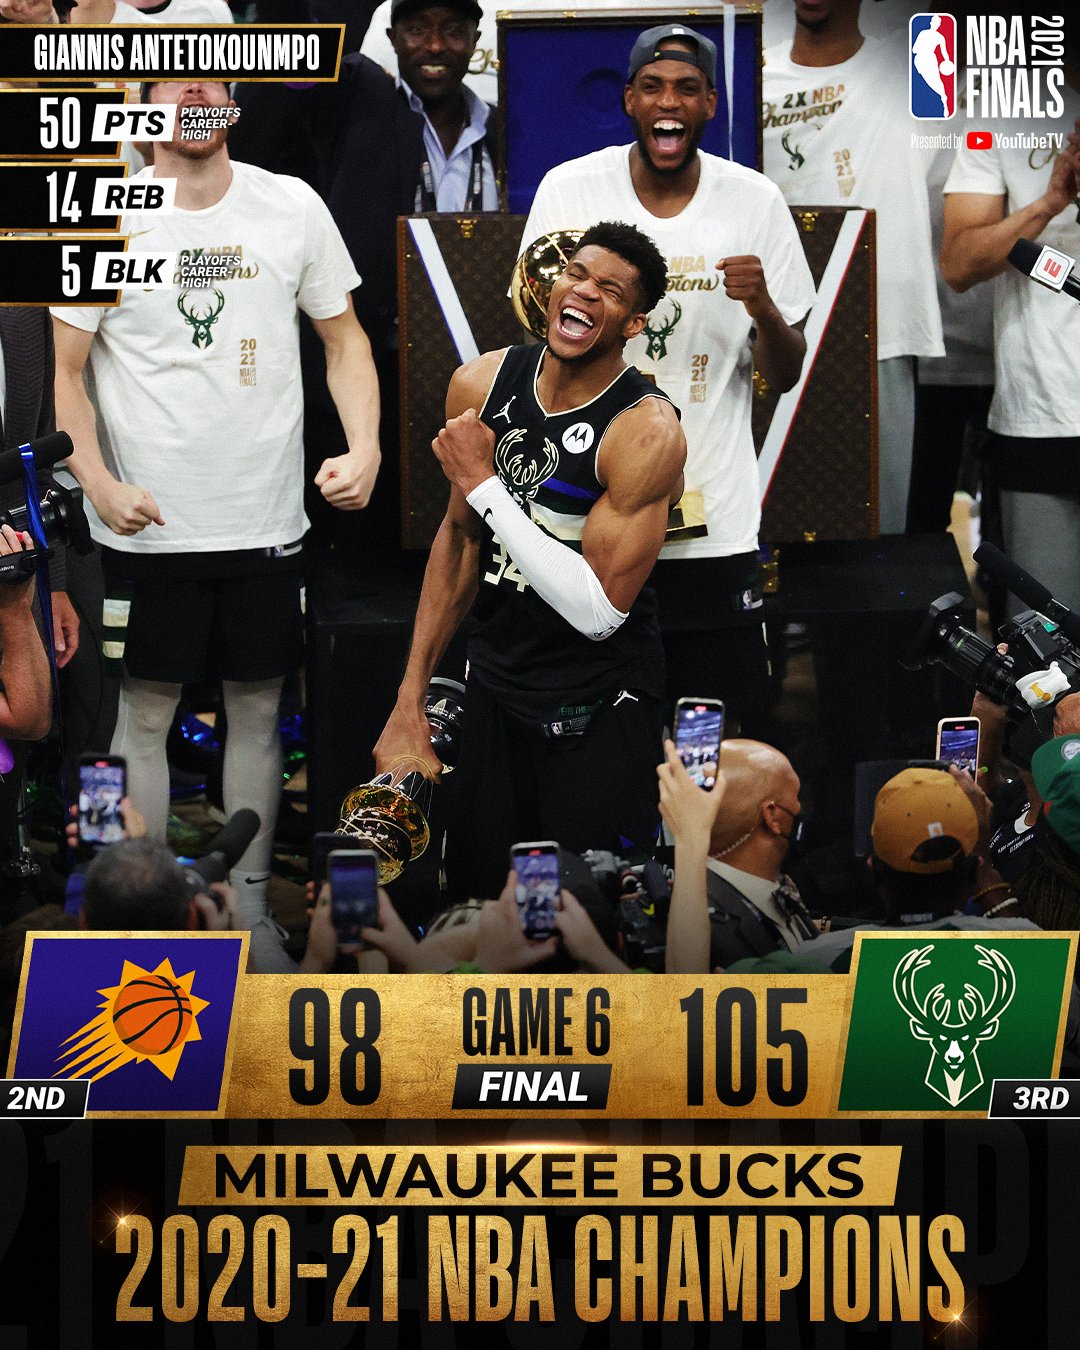 Khris Middleton is Clutch. The #Bucks survive another game, winning game 4  in overtime by 3 points despite Giannis leaving early in the 2nd…